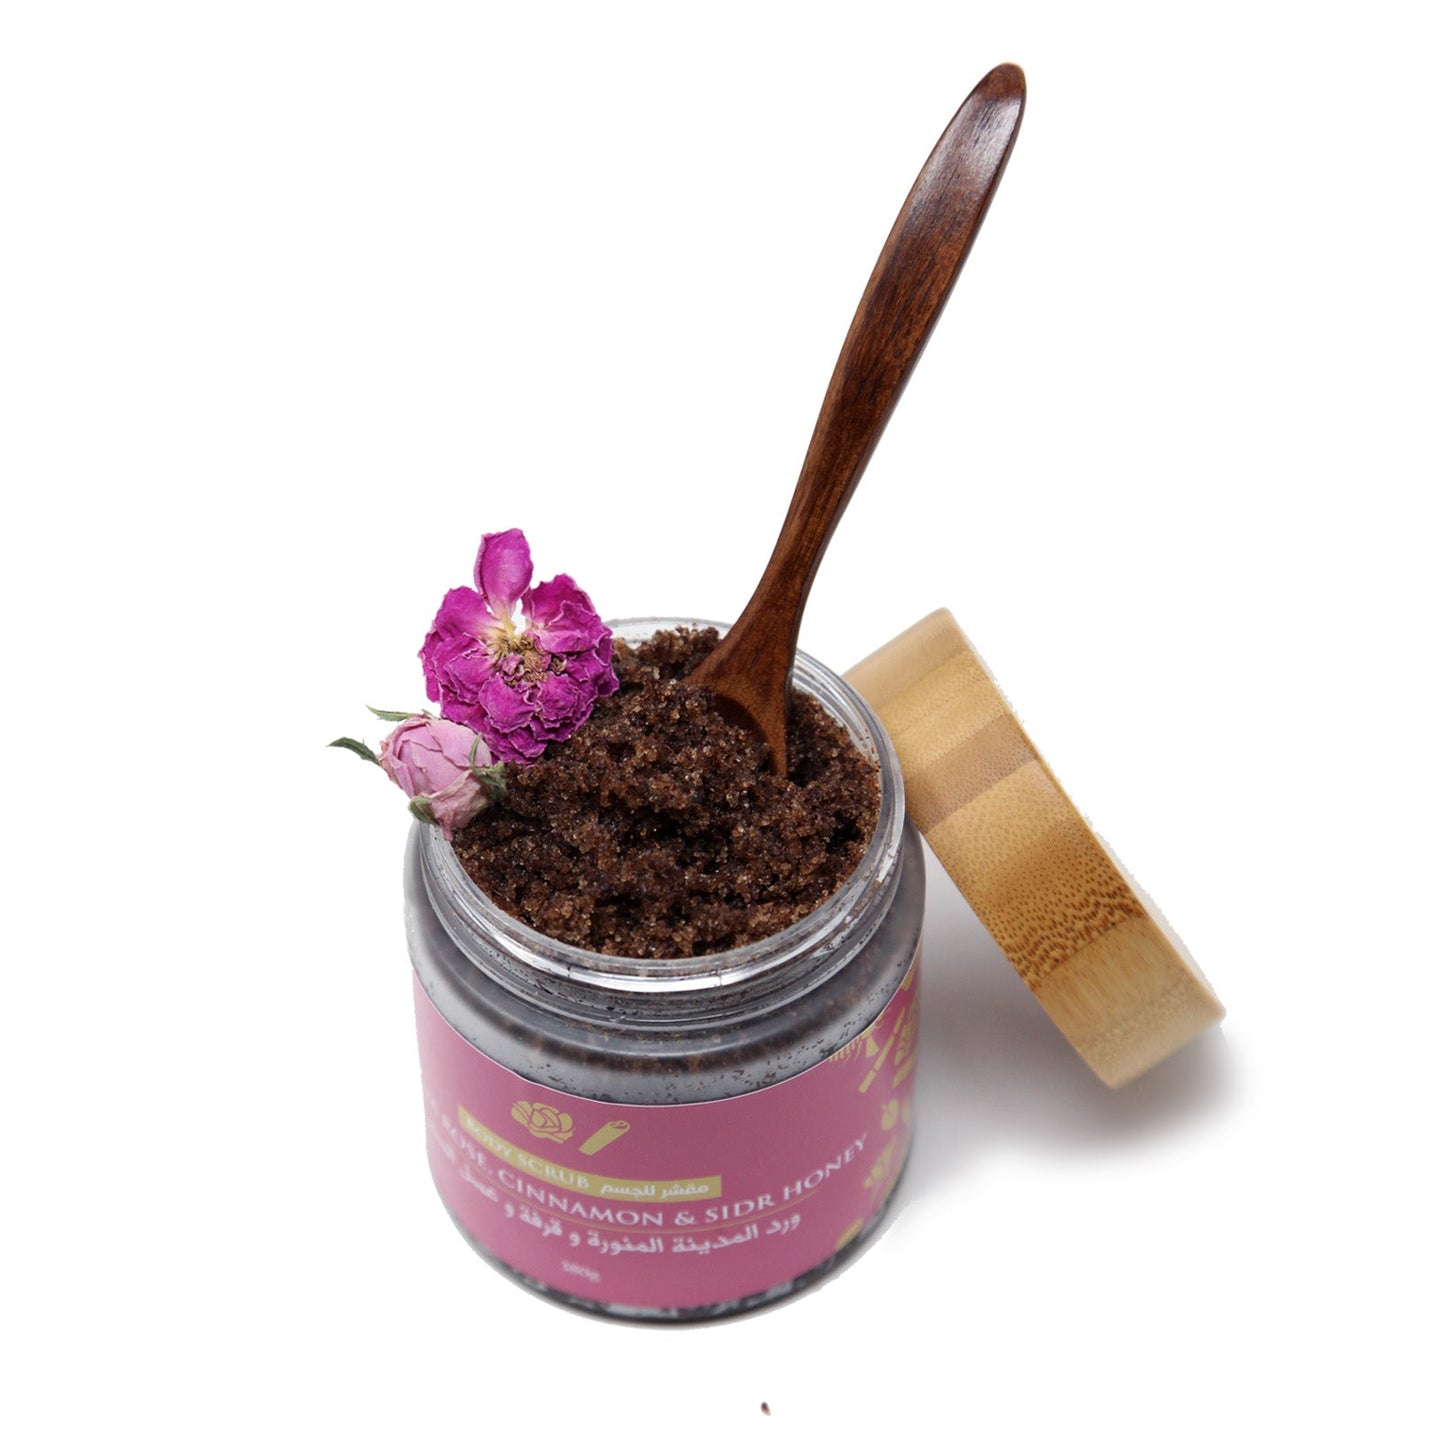 Madina Rose, Cinnamon and Sidr Honey Face and Body Scrub - 350g